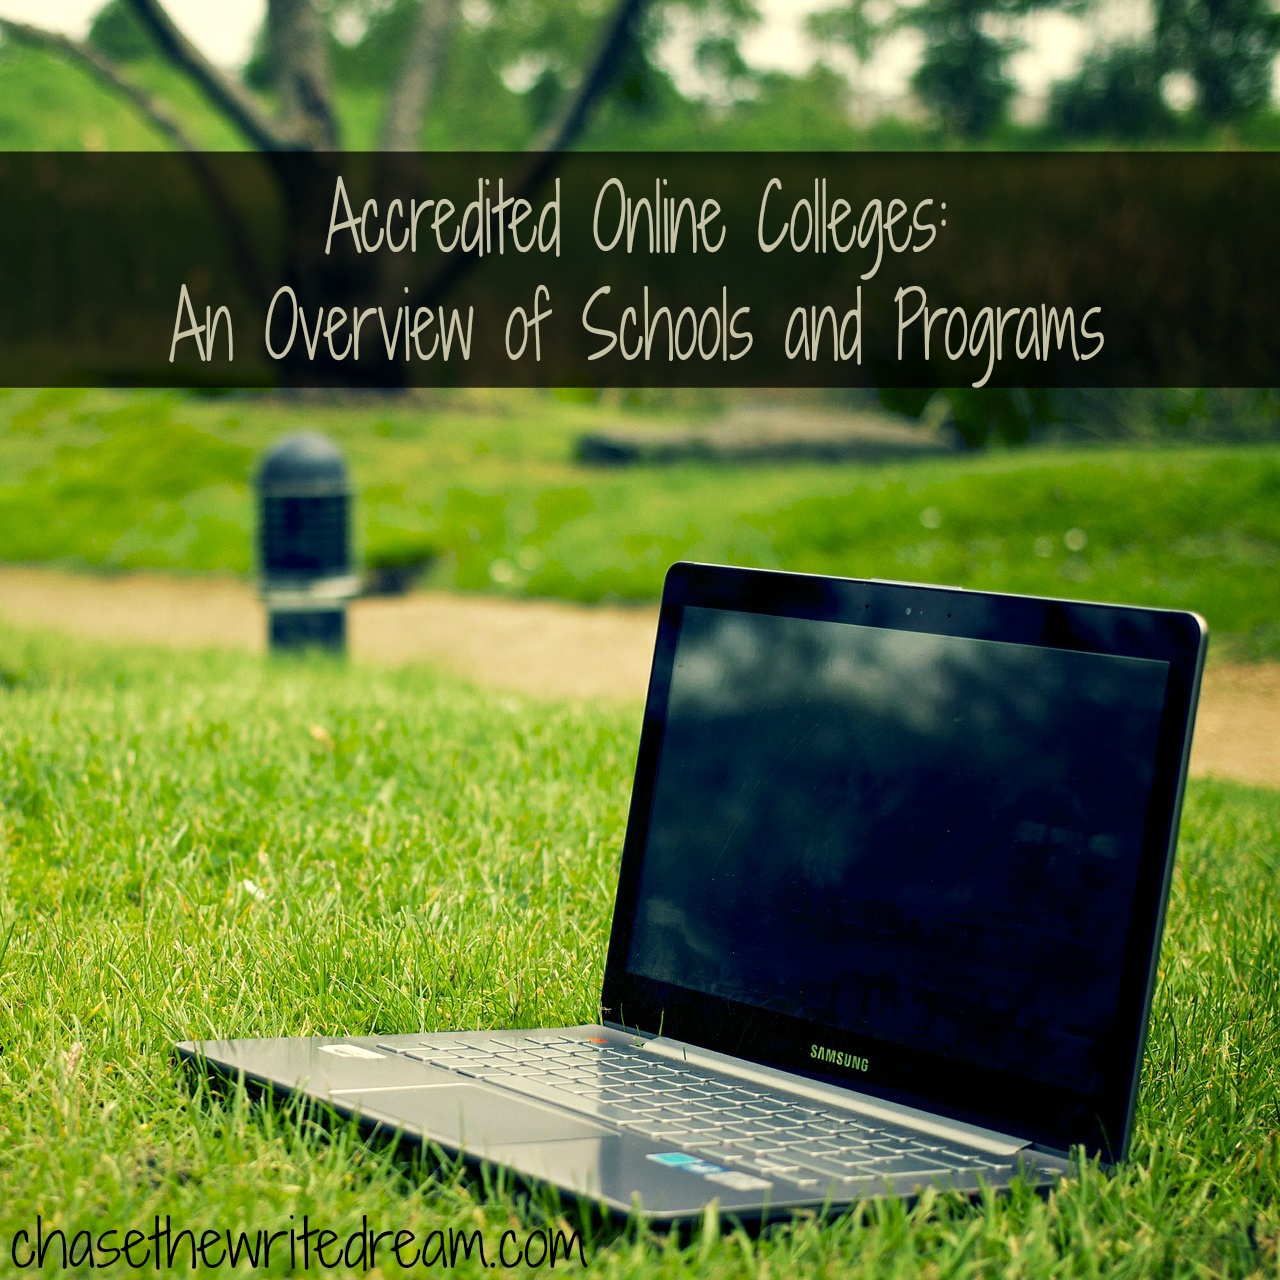 Accredited Online Colleges: An Overview of Schools and Programs